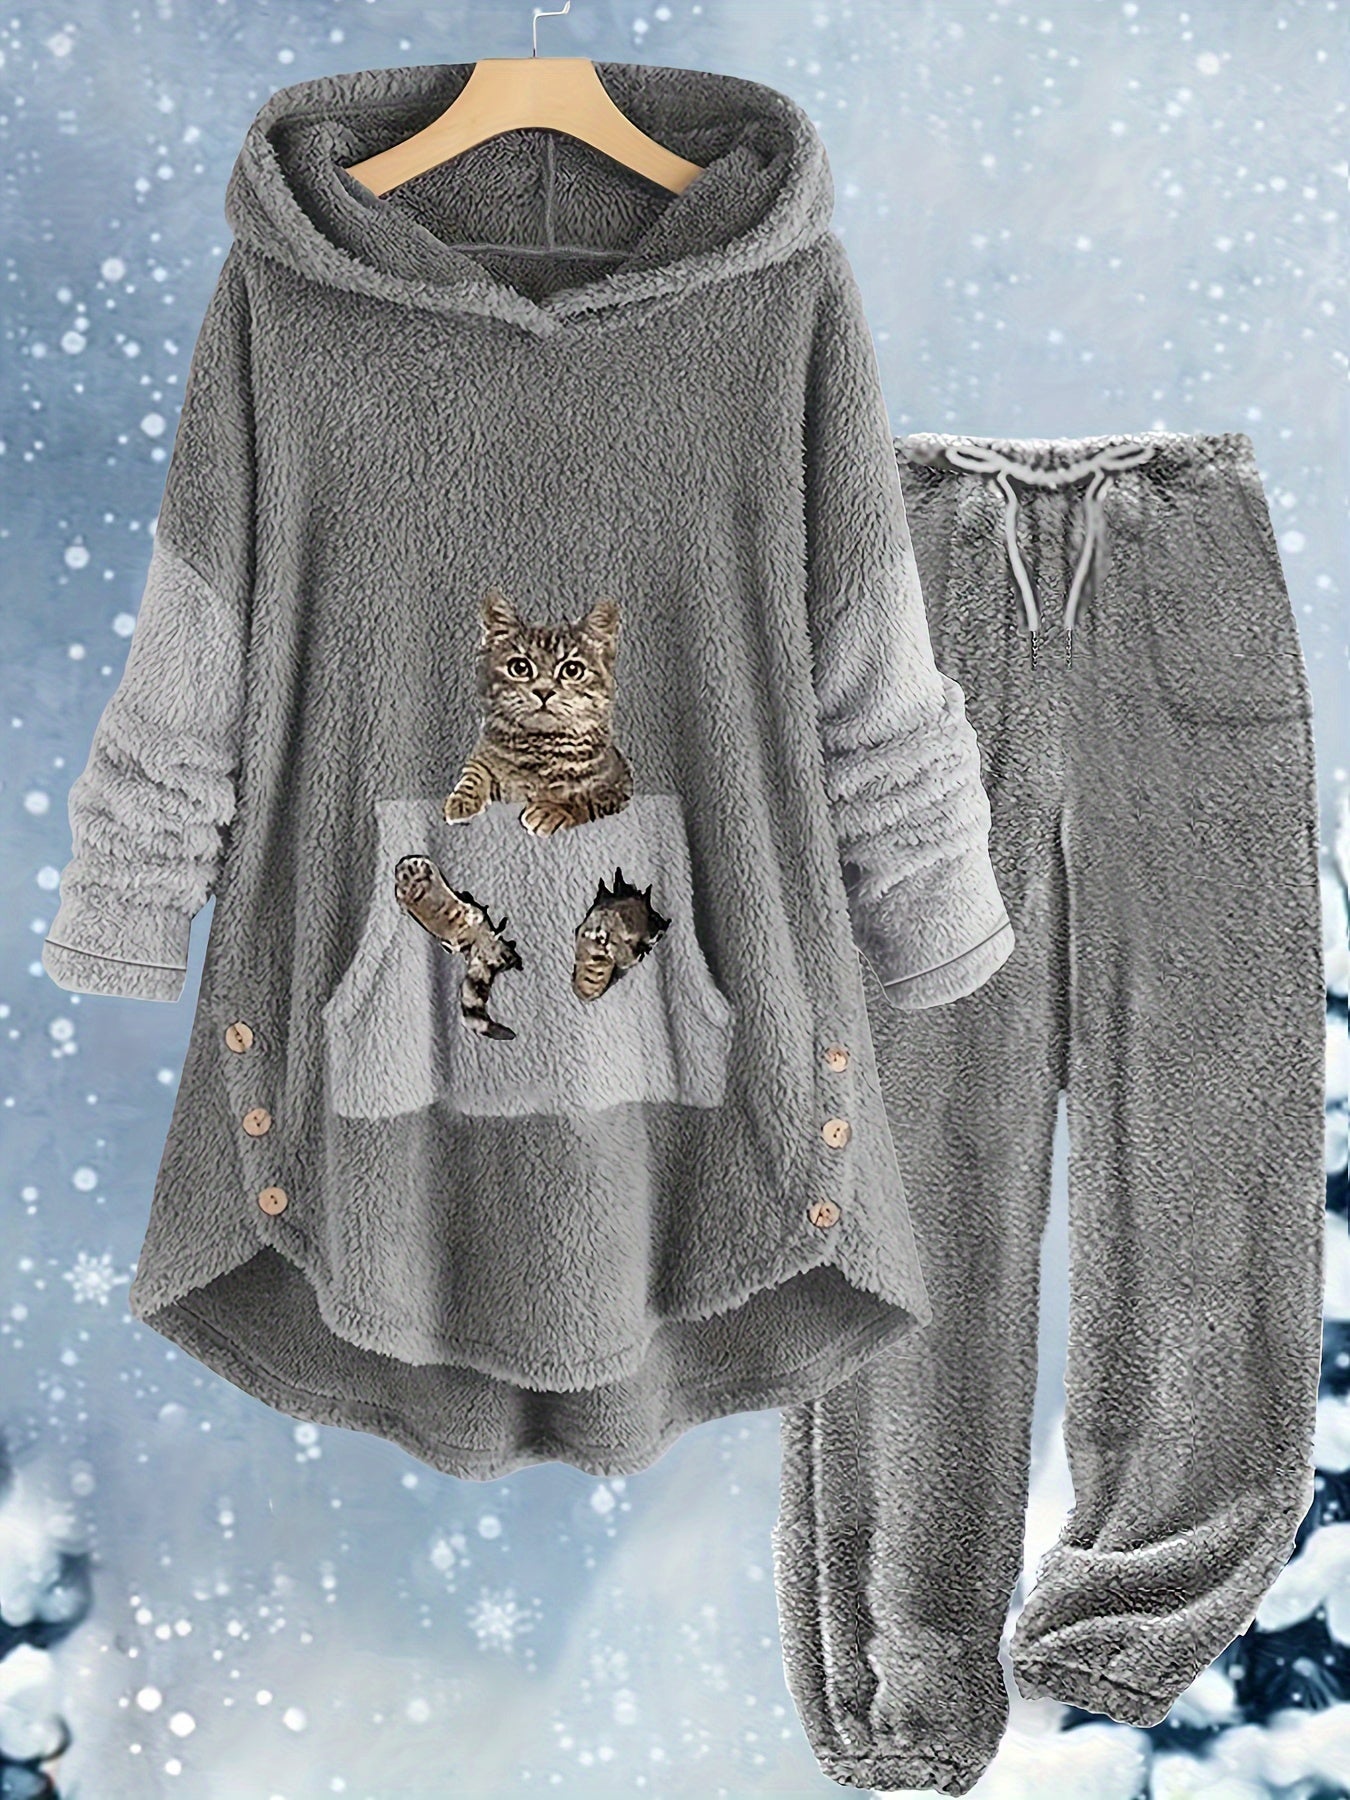 A grey polyester fleece loungewear set with a hooded top featuring a front pocket decorated with a cartoon image of a cat. The Maramalive™ Plus Size Casual Outfits Two Piece Set, Women's Plus Cat Print Fleece Long Sleeve Button Decor Hoodie & Pants Outfits 2 Piece Set is displayed on a hanger against a winter-themed background.